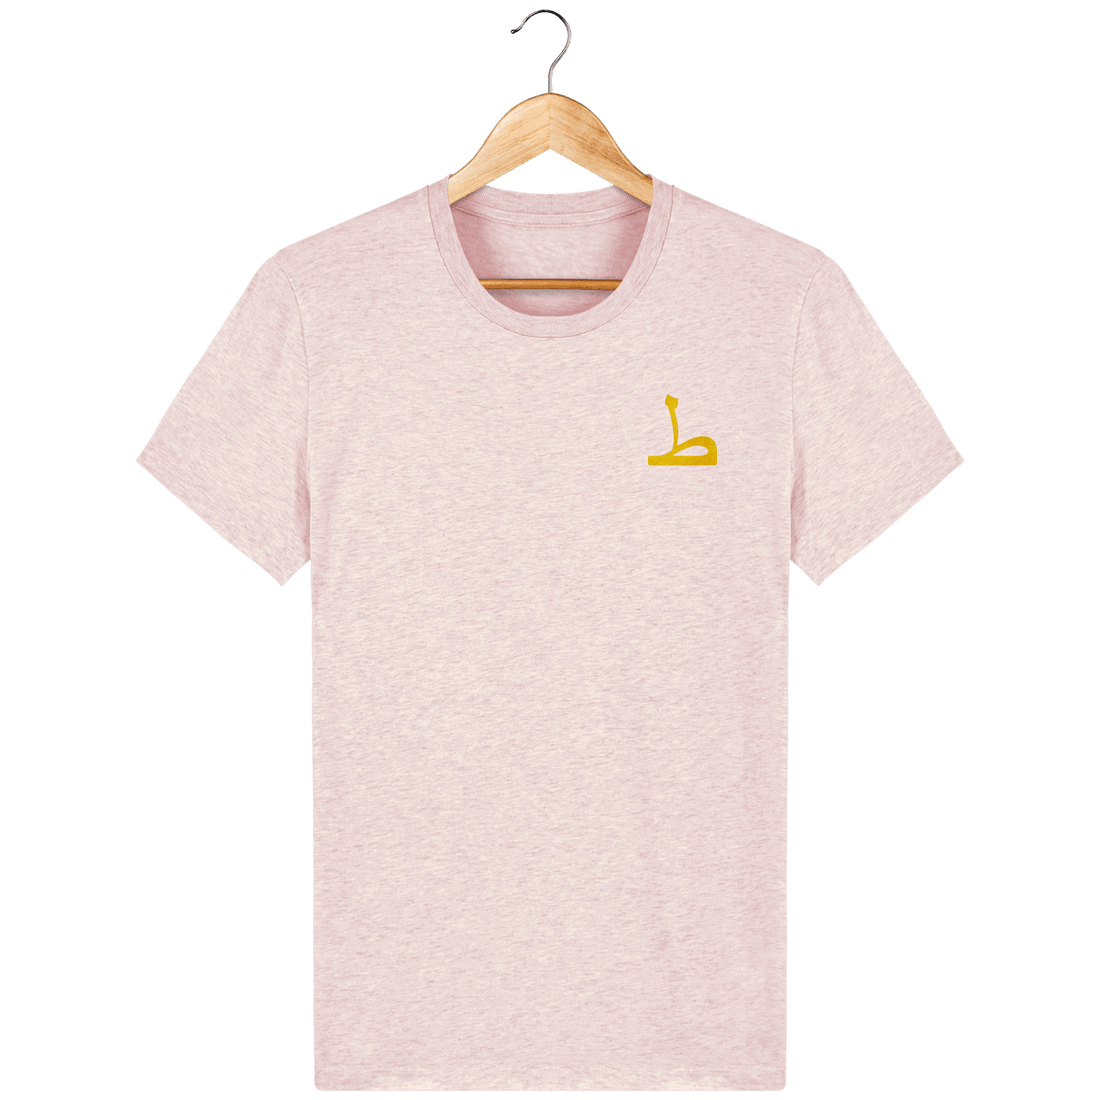 Unisexe>Tee-shirts - T-Shirt Homme <br>  Lettre Arabe Taa